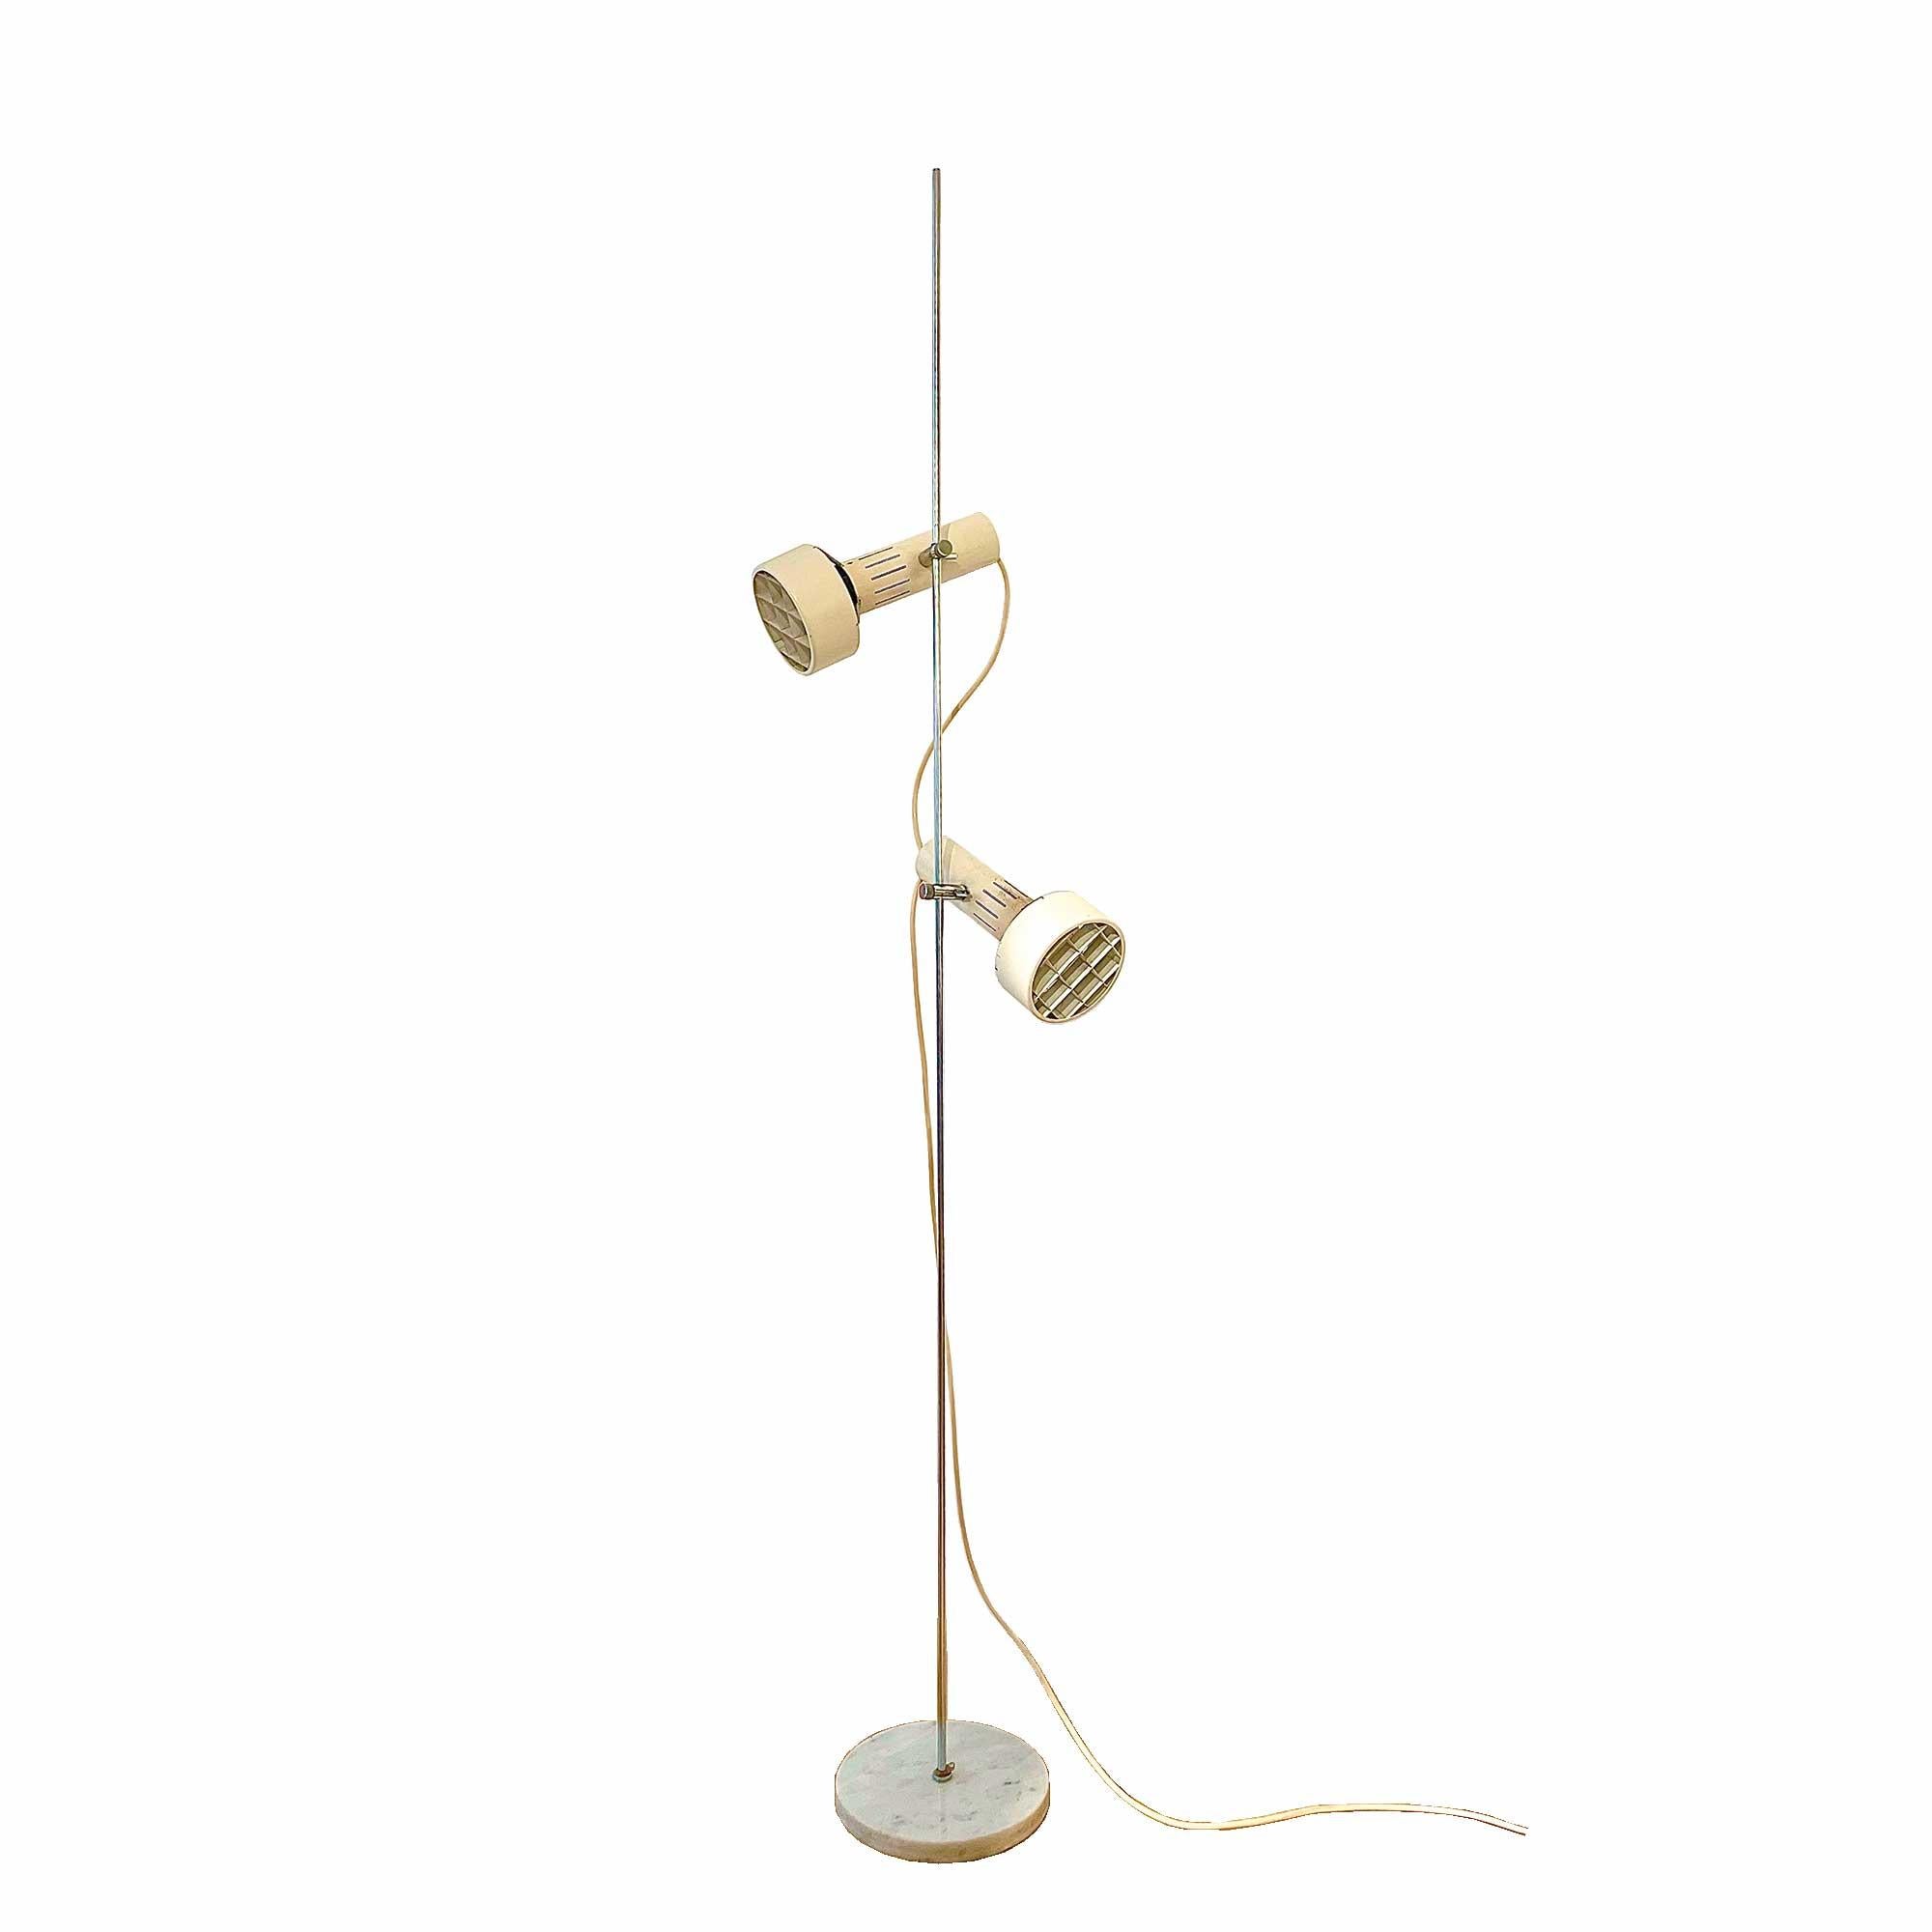 Alain Richard undoubtedly invented the first French spotlight at the end of the 1950s. This floor lamp is a designer classic, its minimal and refined style generates simple shapes perfectly proportioned in the service of perfect functionality.